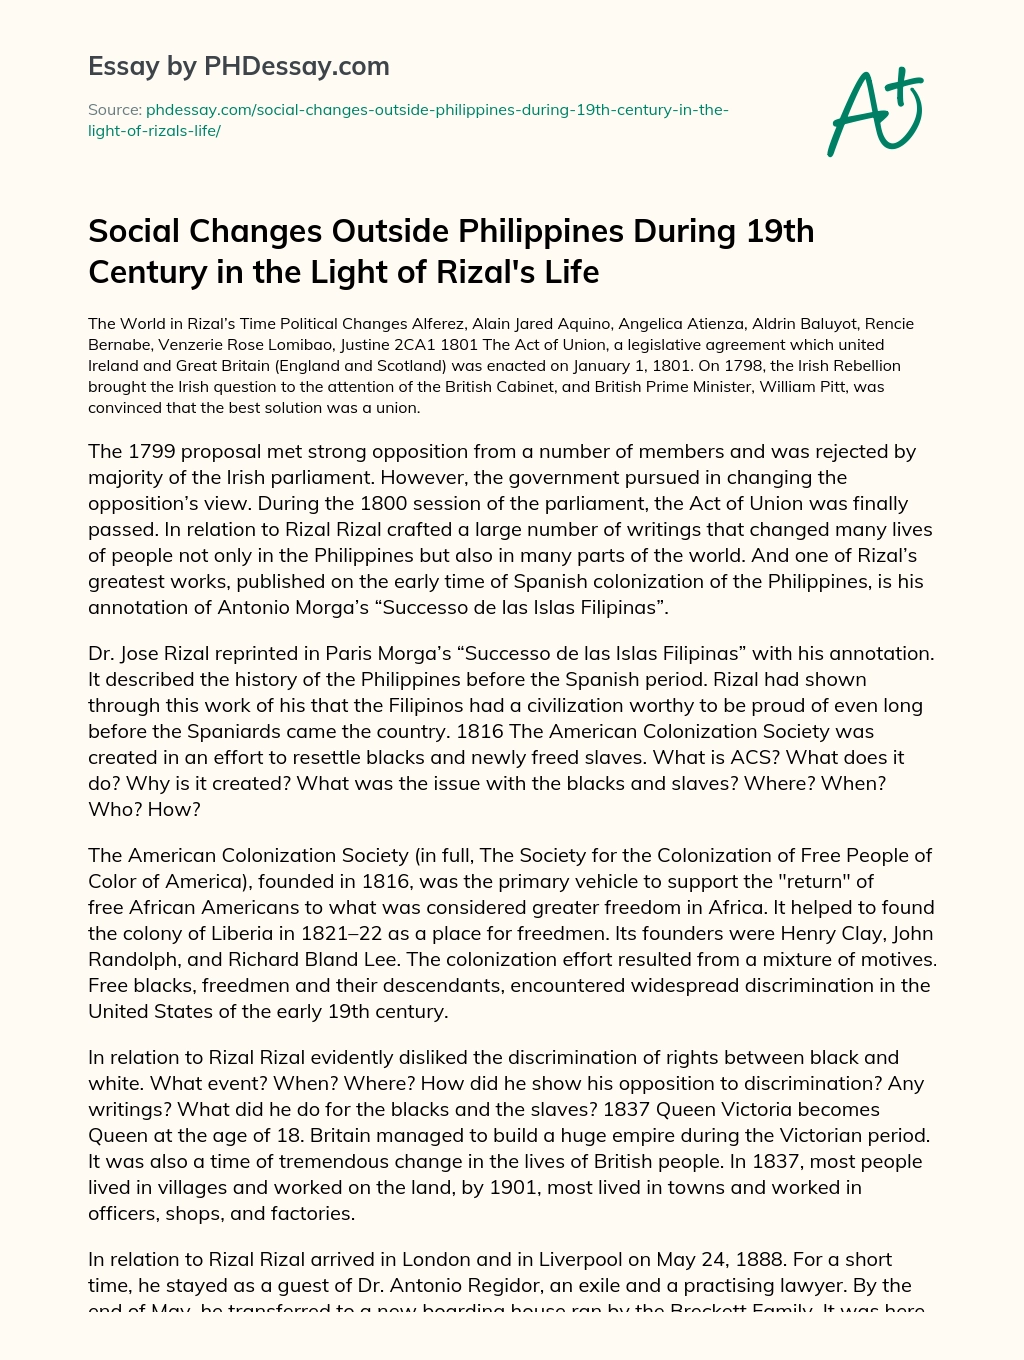 Social Changes Outside Philippines During 19th Century in the Light of Rizal’s Life essay